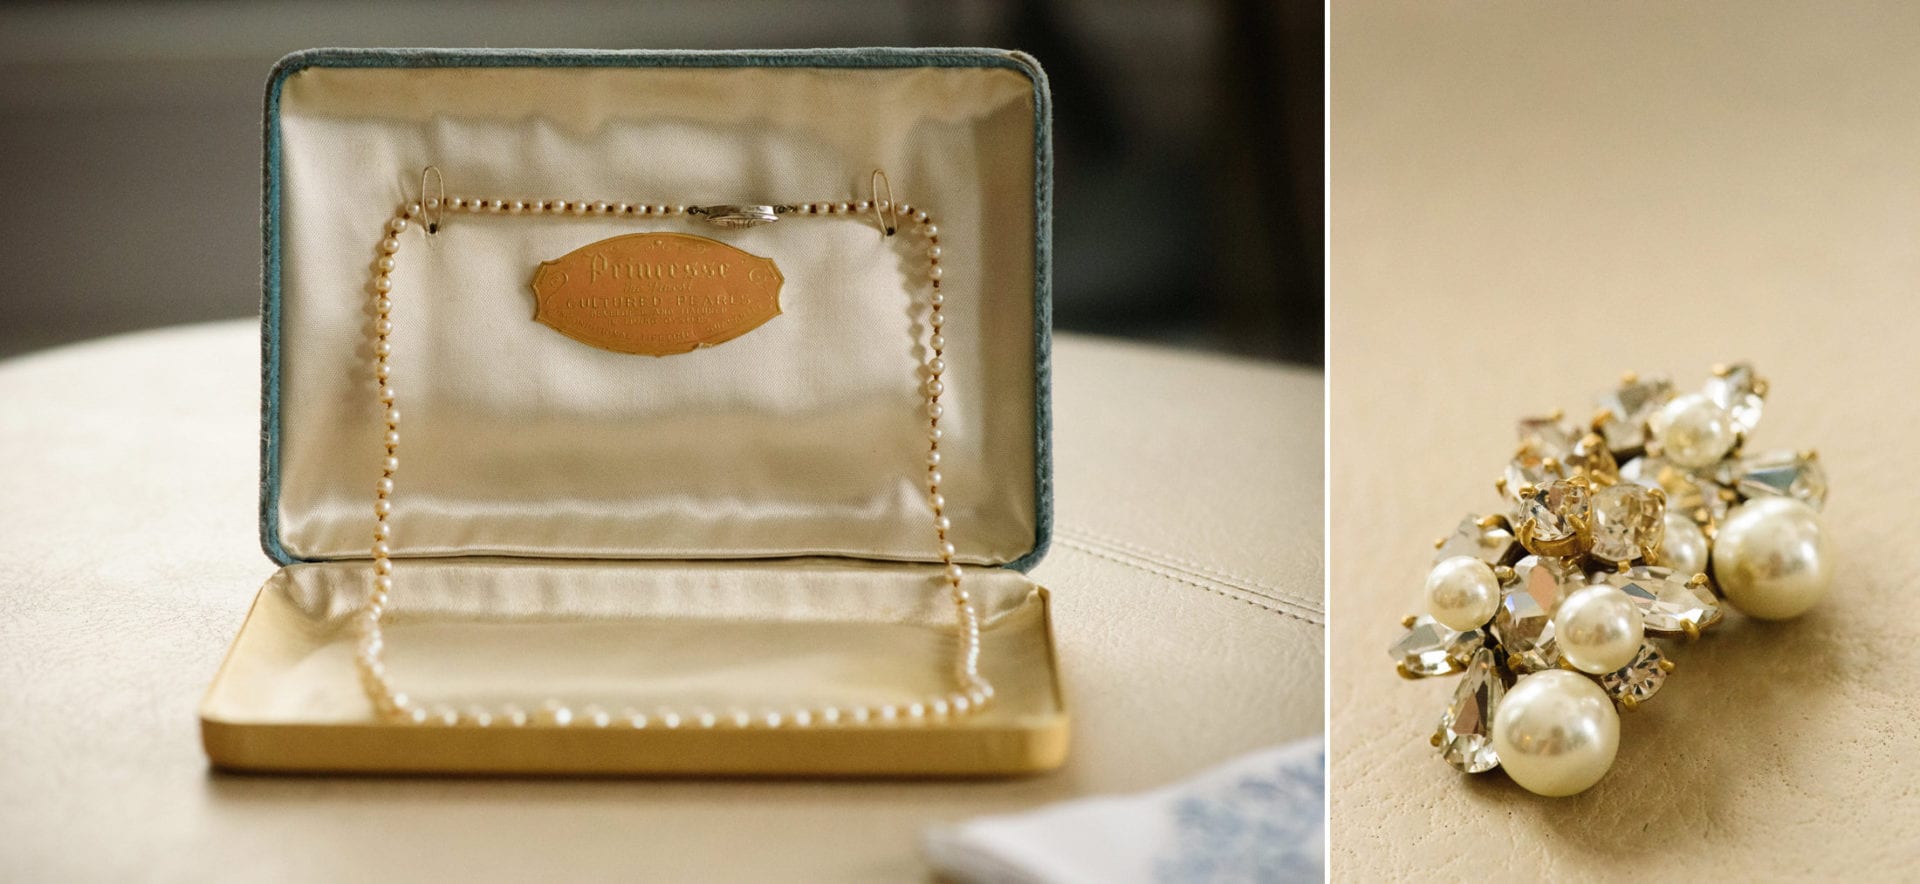 Two photos: A vintage box containing a string of cultured pearls. The second photo shows a pearl and diamond brooch.